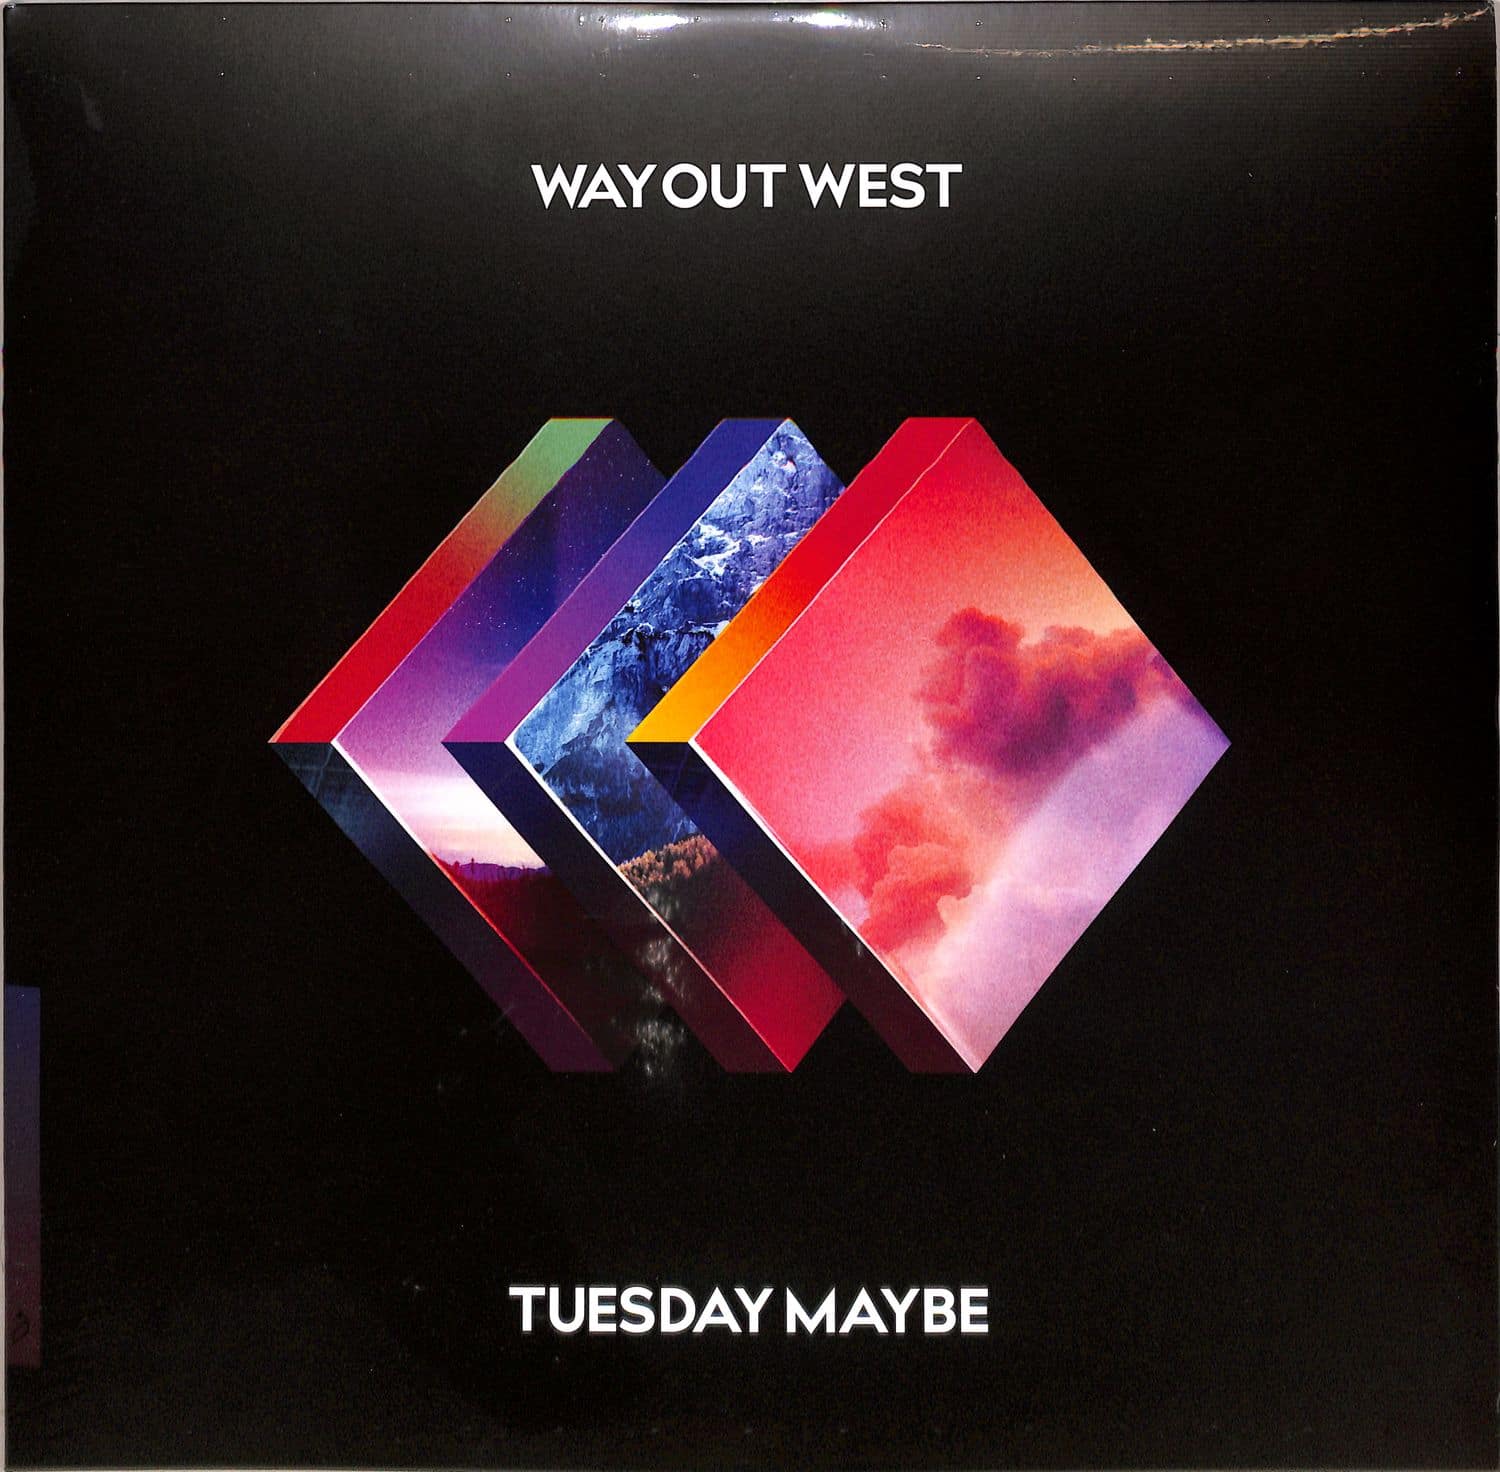 Way Out West - TUESDAY MAYBE 